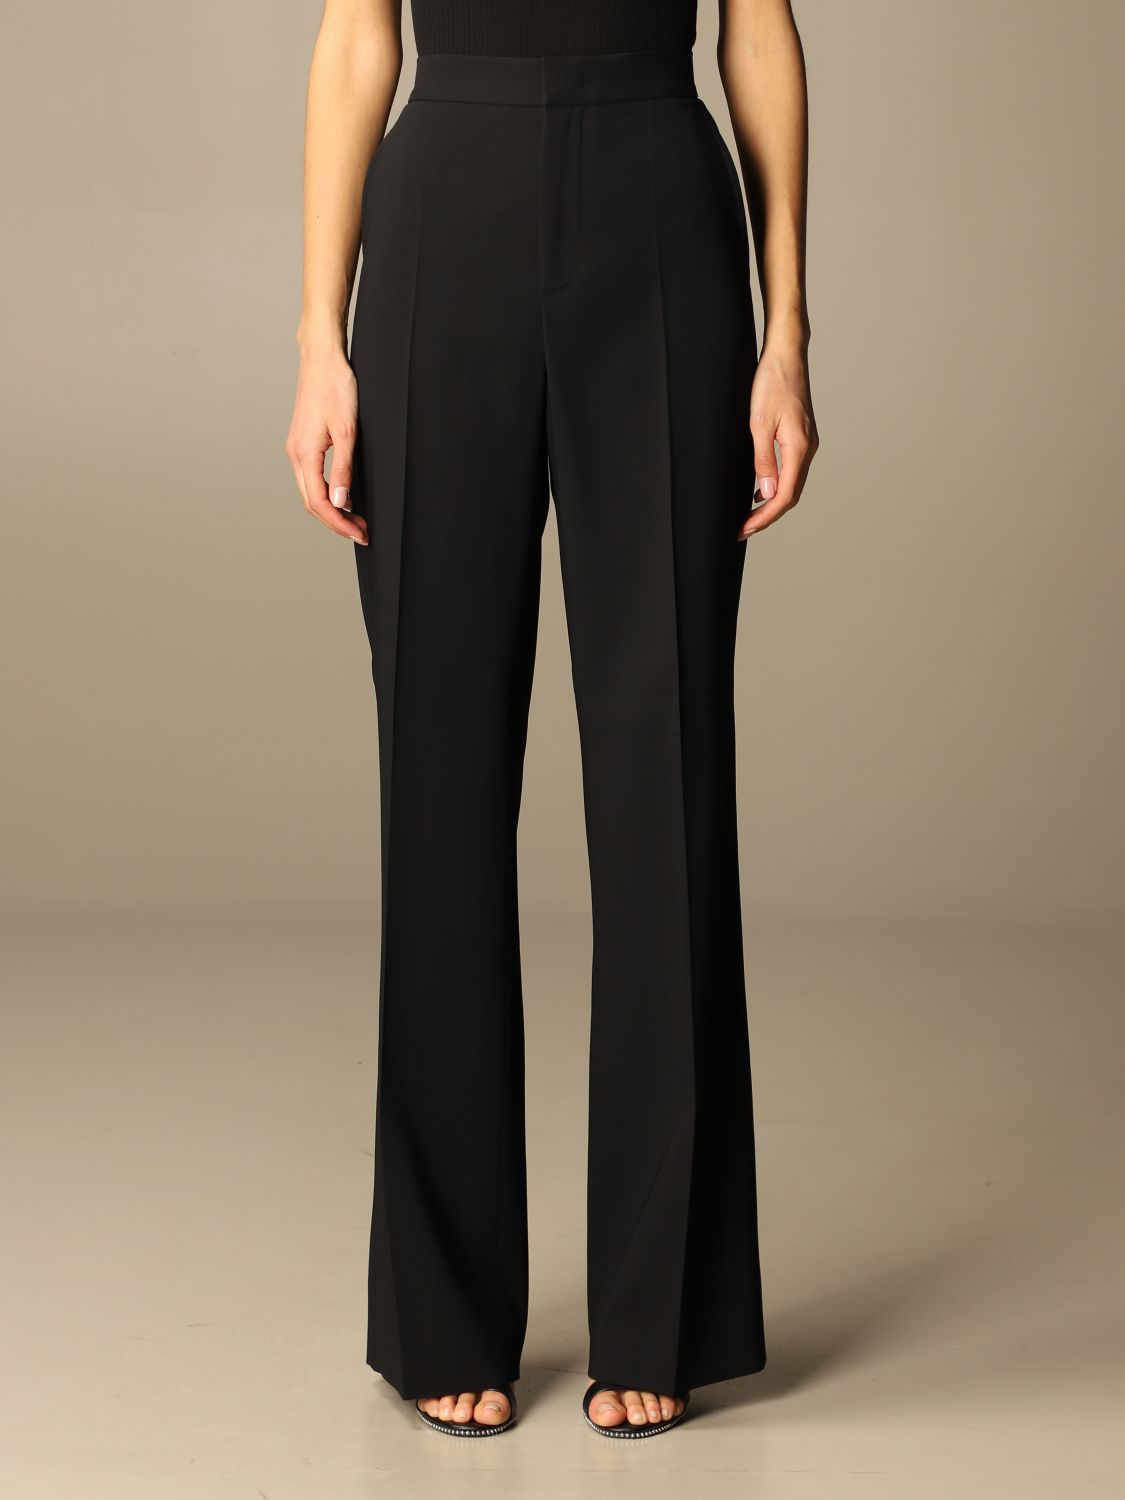 Classic trousers with high-waisted